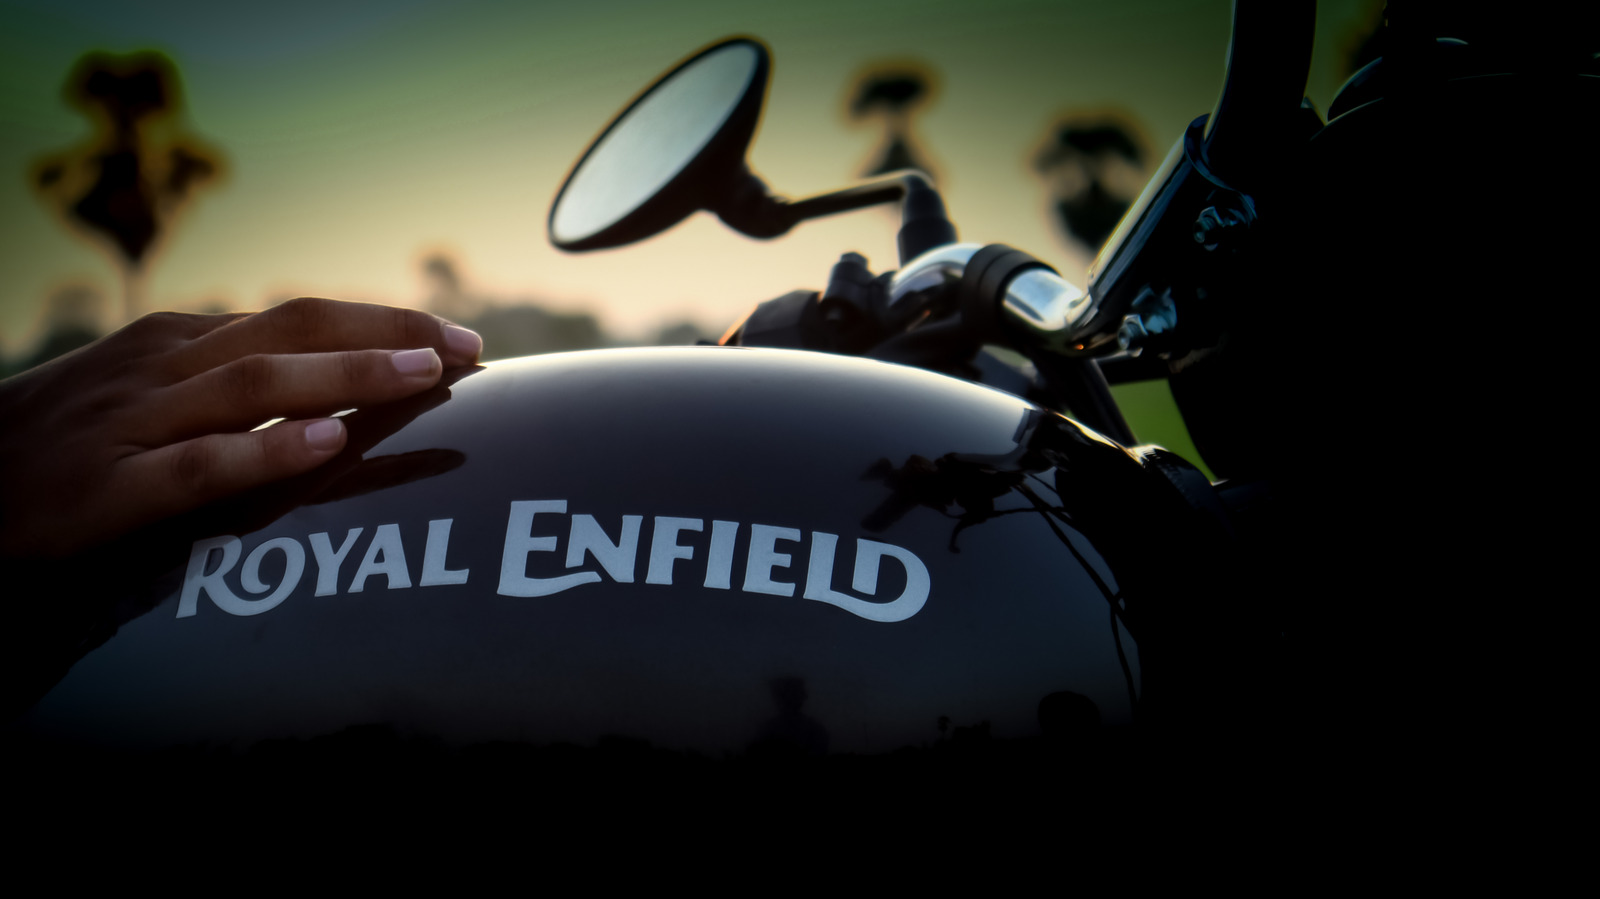 5 Things Every Motorcycle Enthusiast Should Know About Royal Enfield – SlashGear